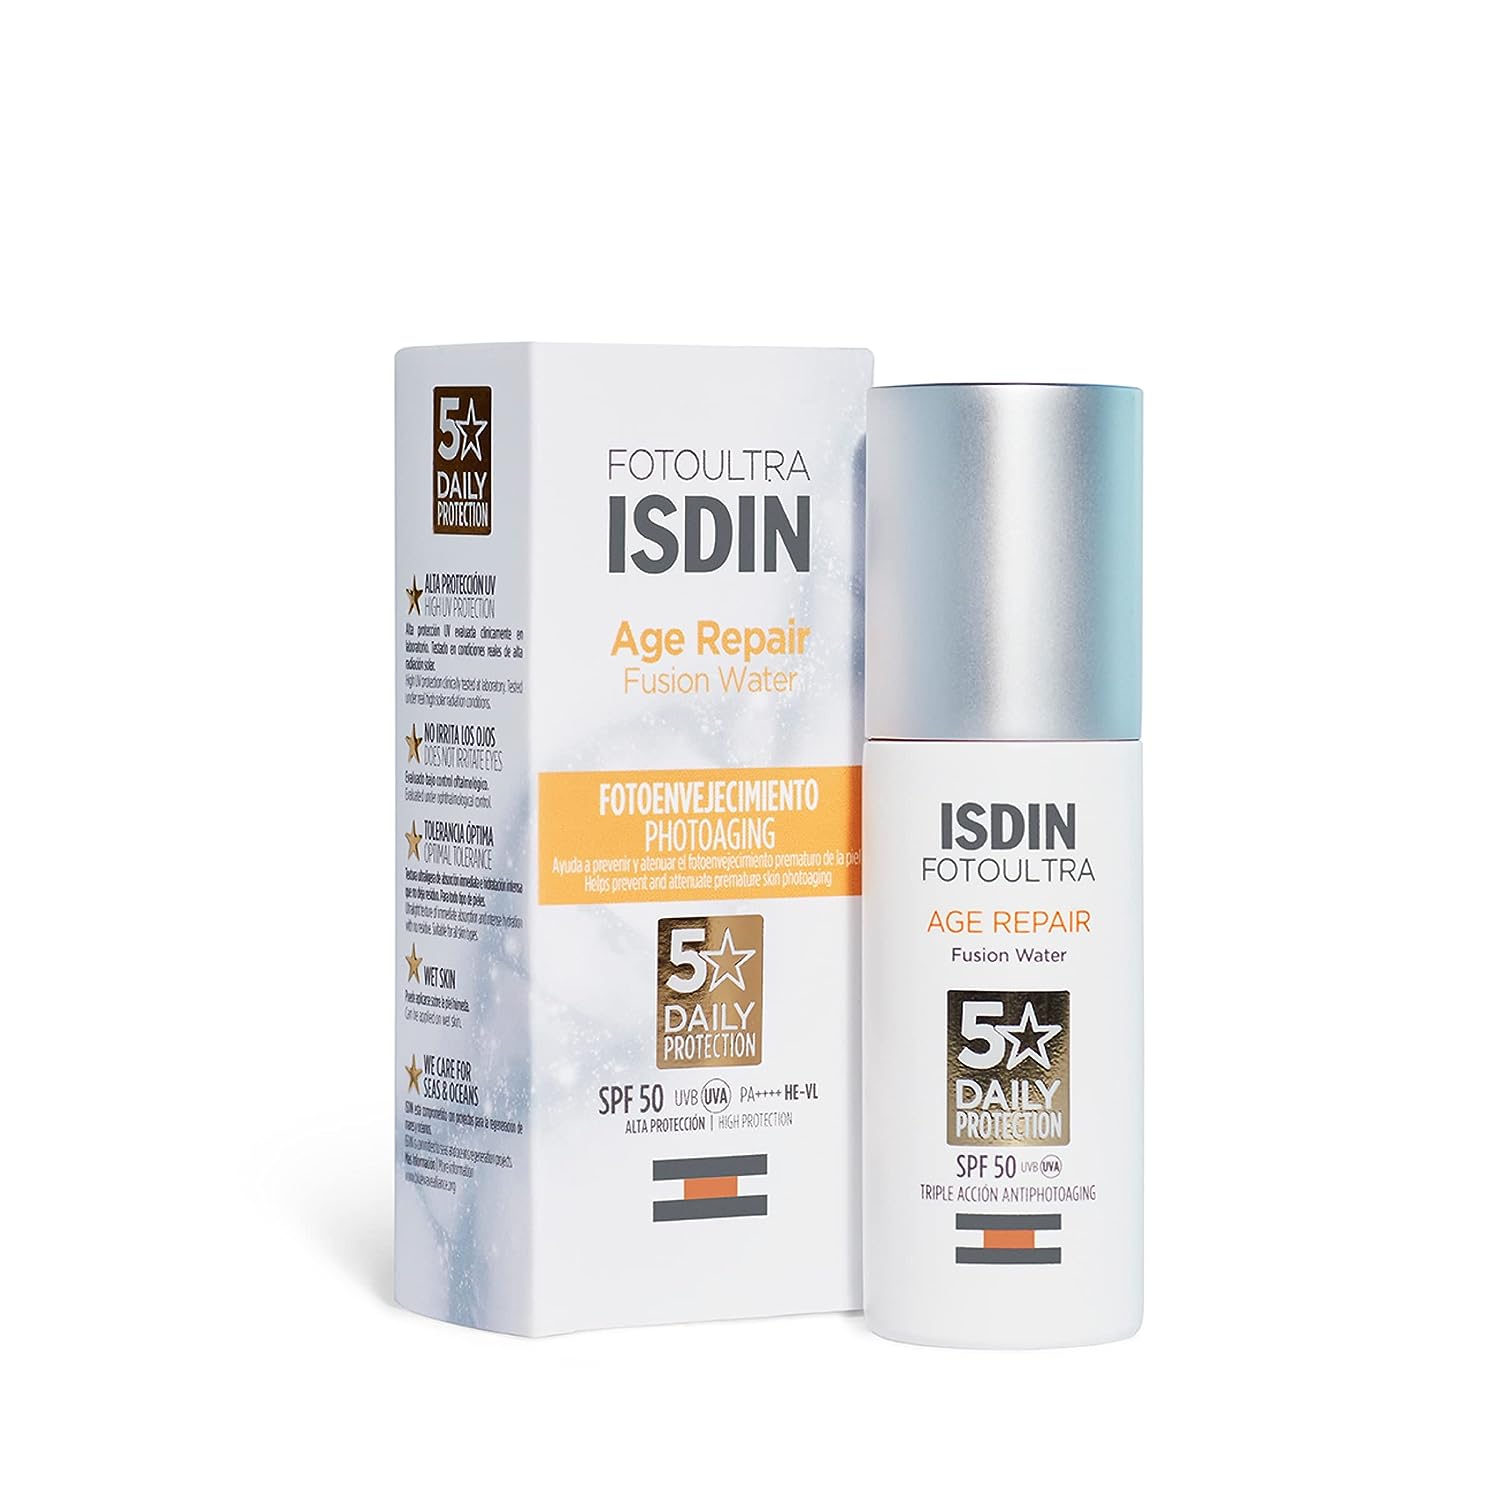 ISDIN Fotoultra Age Repair FW SPF 50 | Daily Sun Cream for Face | Triple anti-aging effect, 50 ml